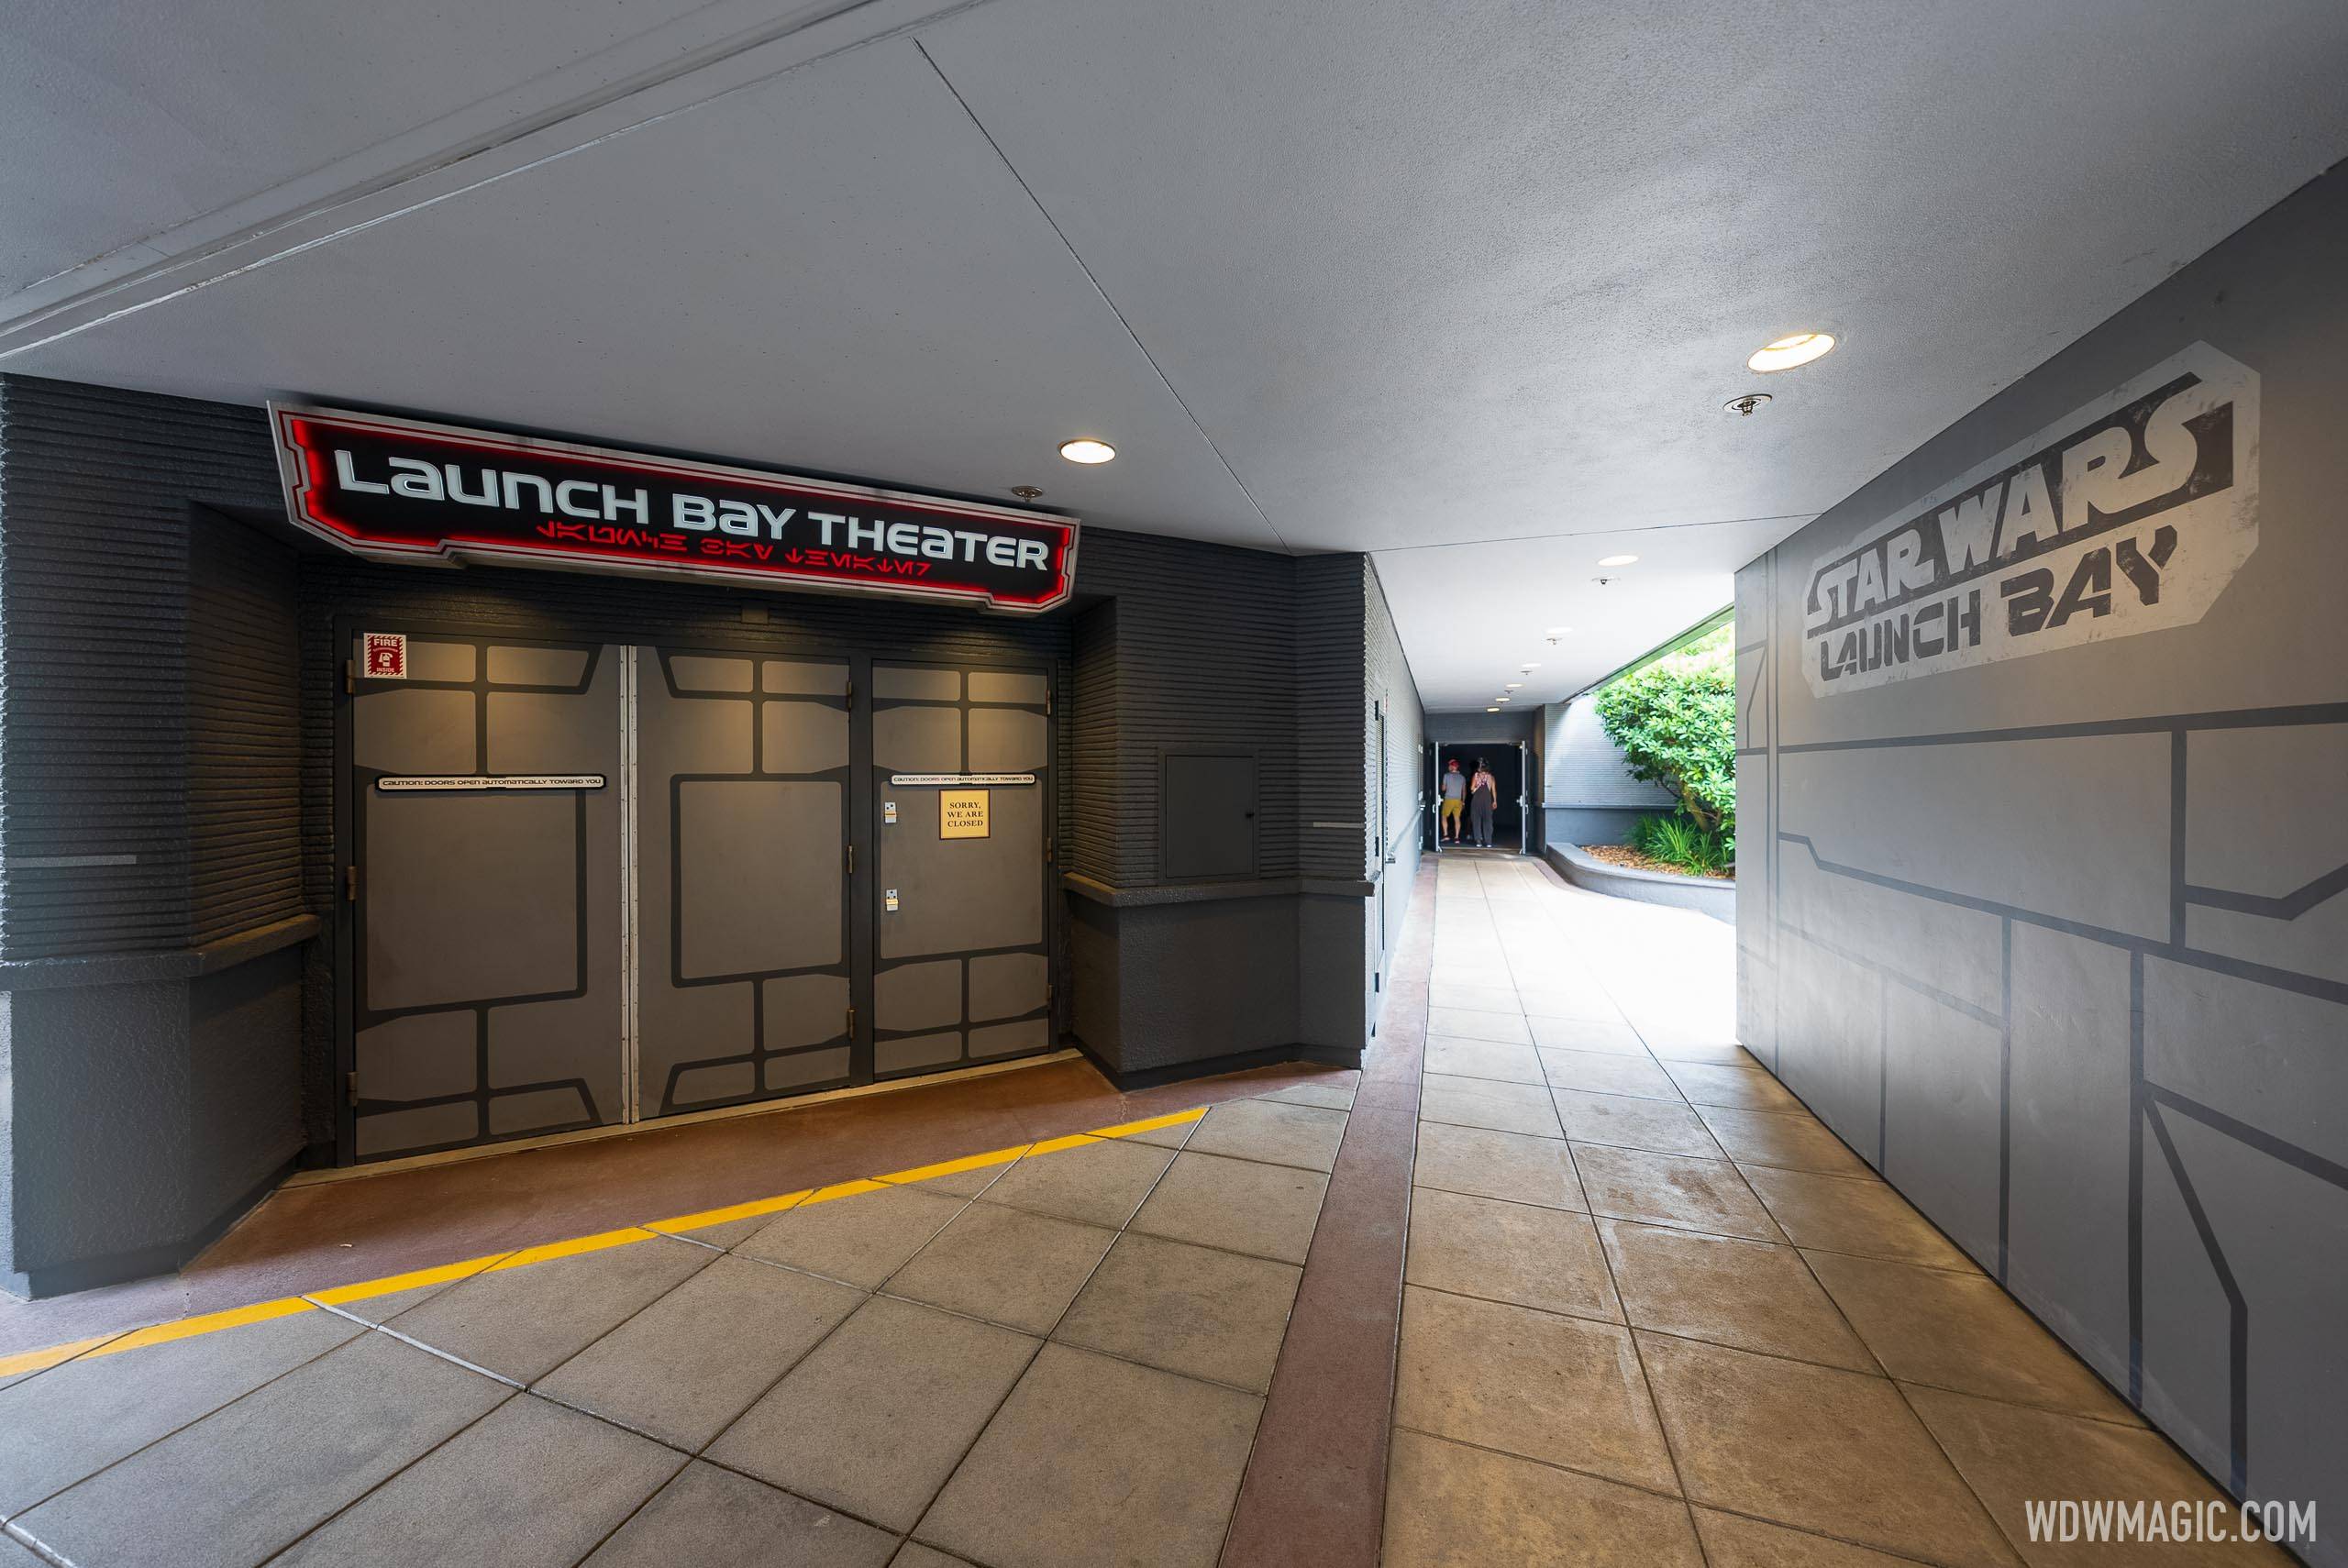 Launch Bay Theater remains closed